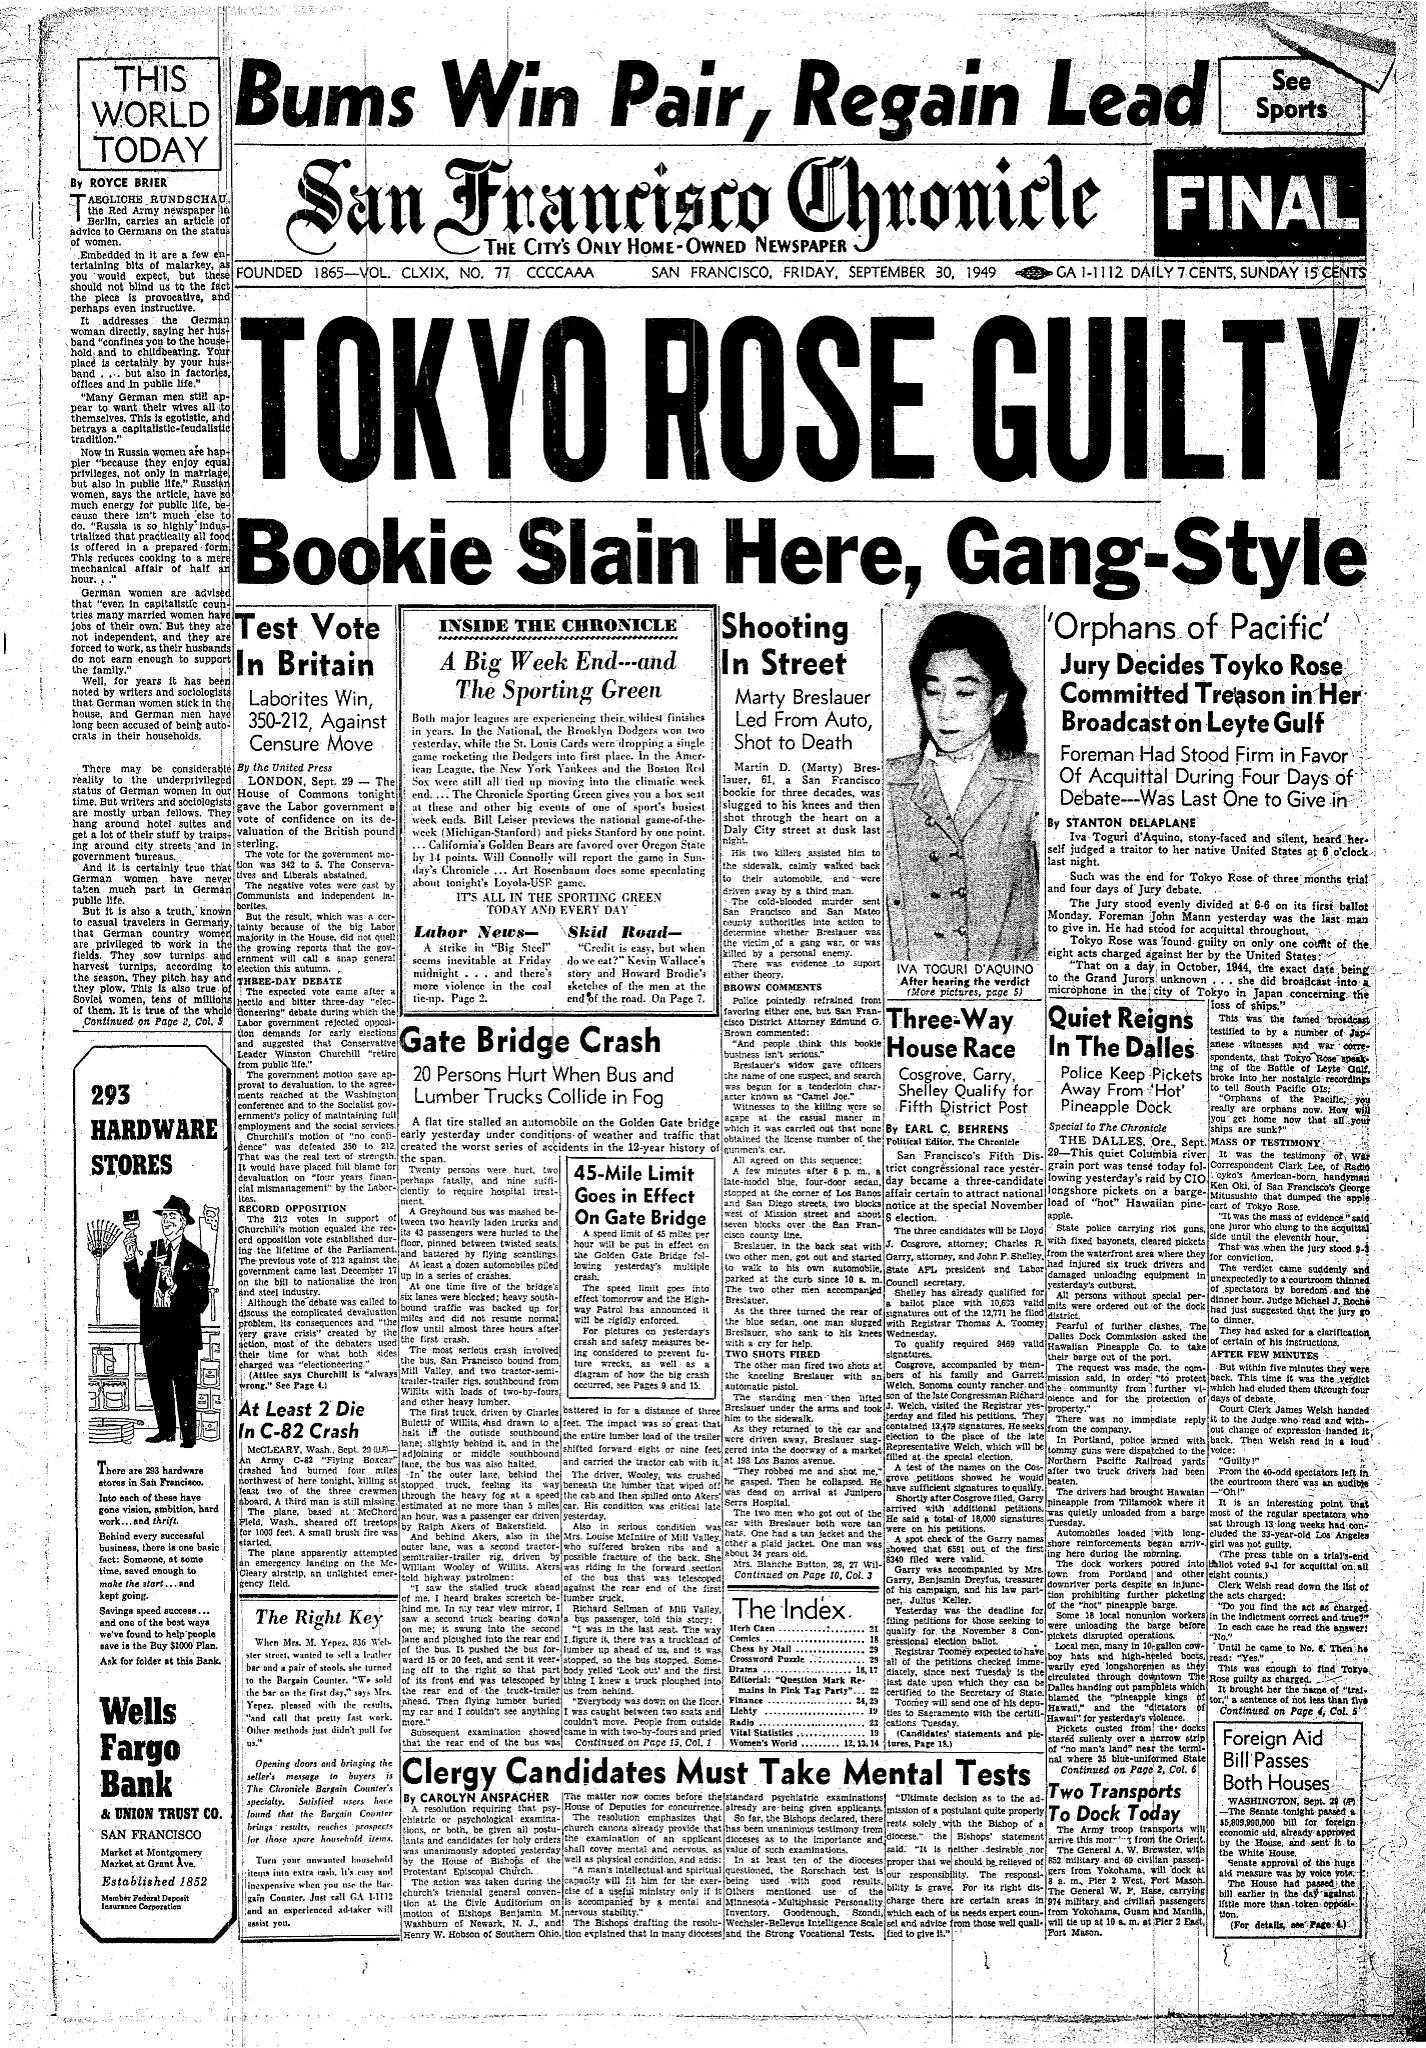 Chronicle Covers: When Tokyo Rose was found guilty - SFChronicle.com